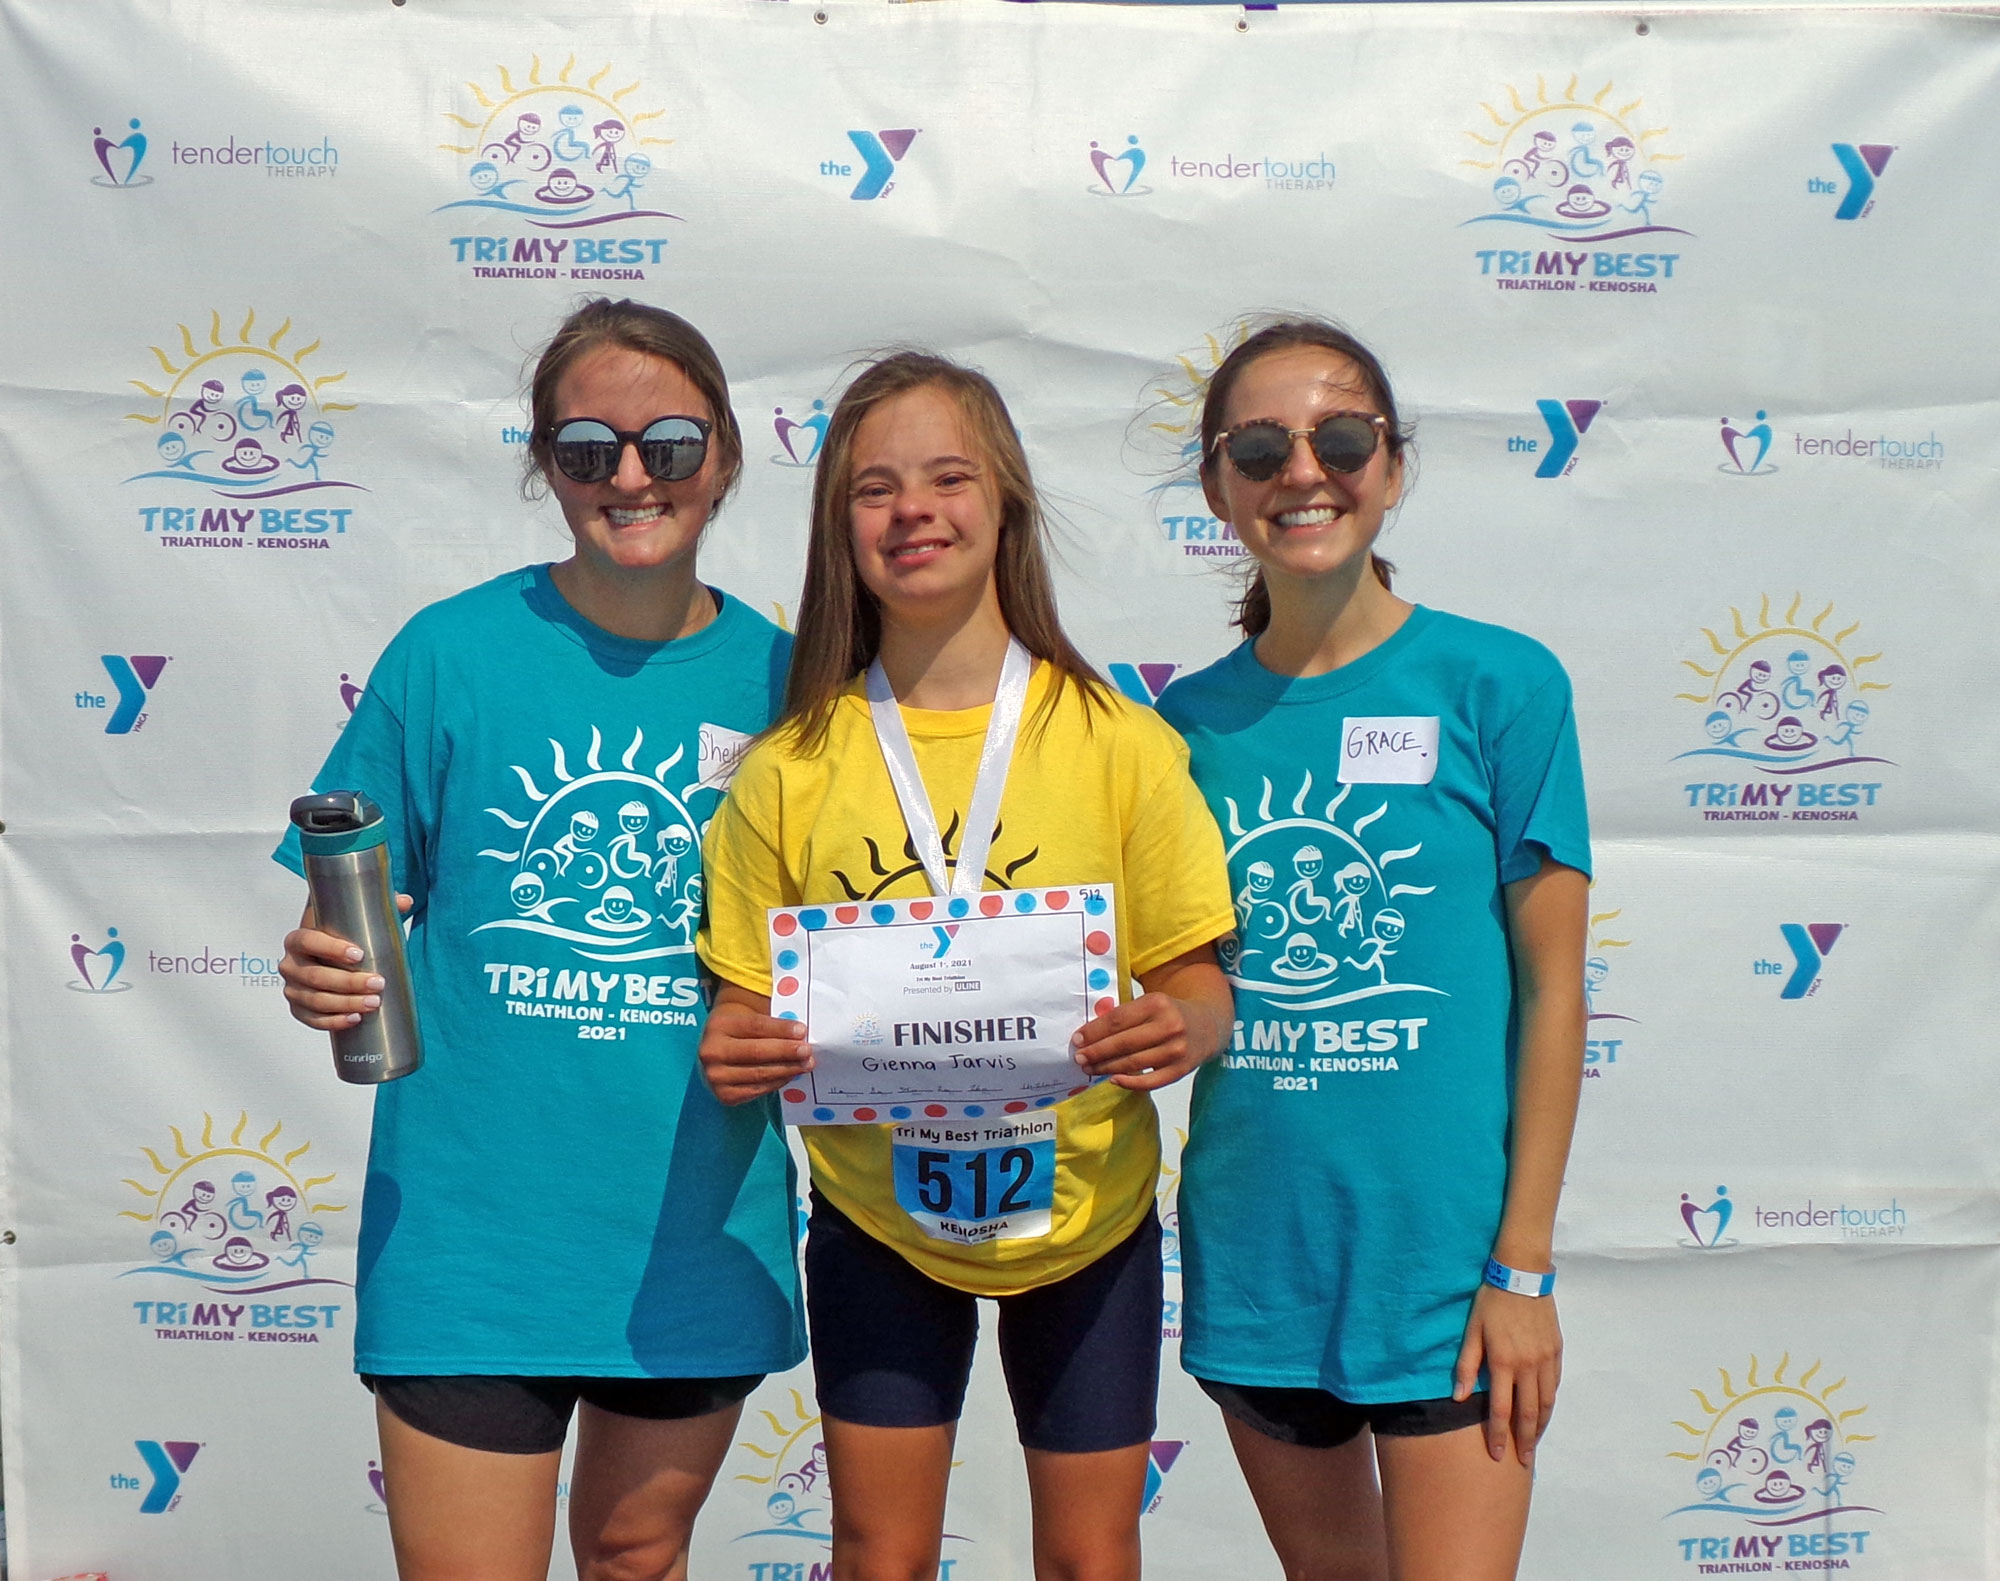 A Tri athlete poses with her athlete buddies after the race